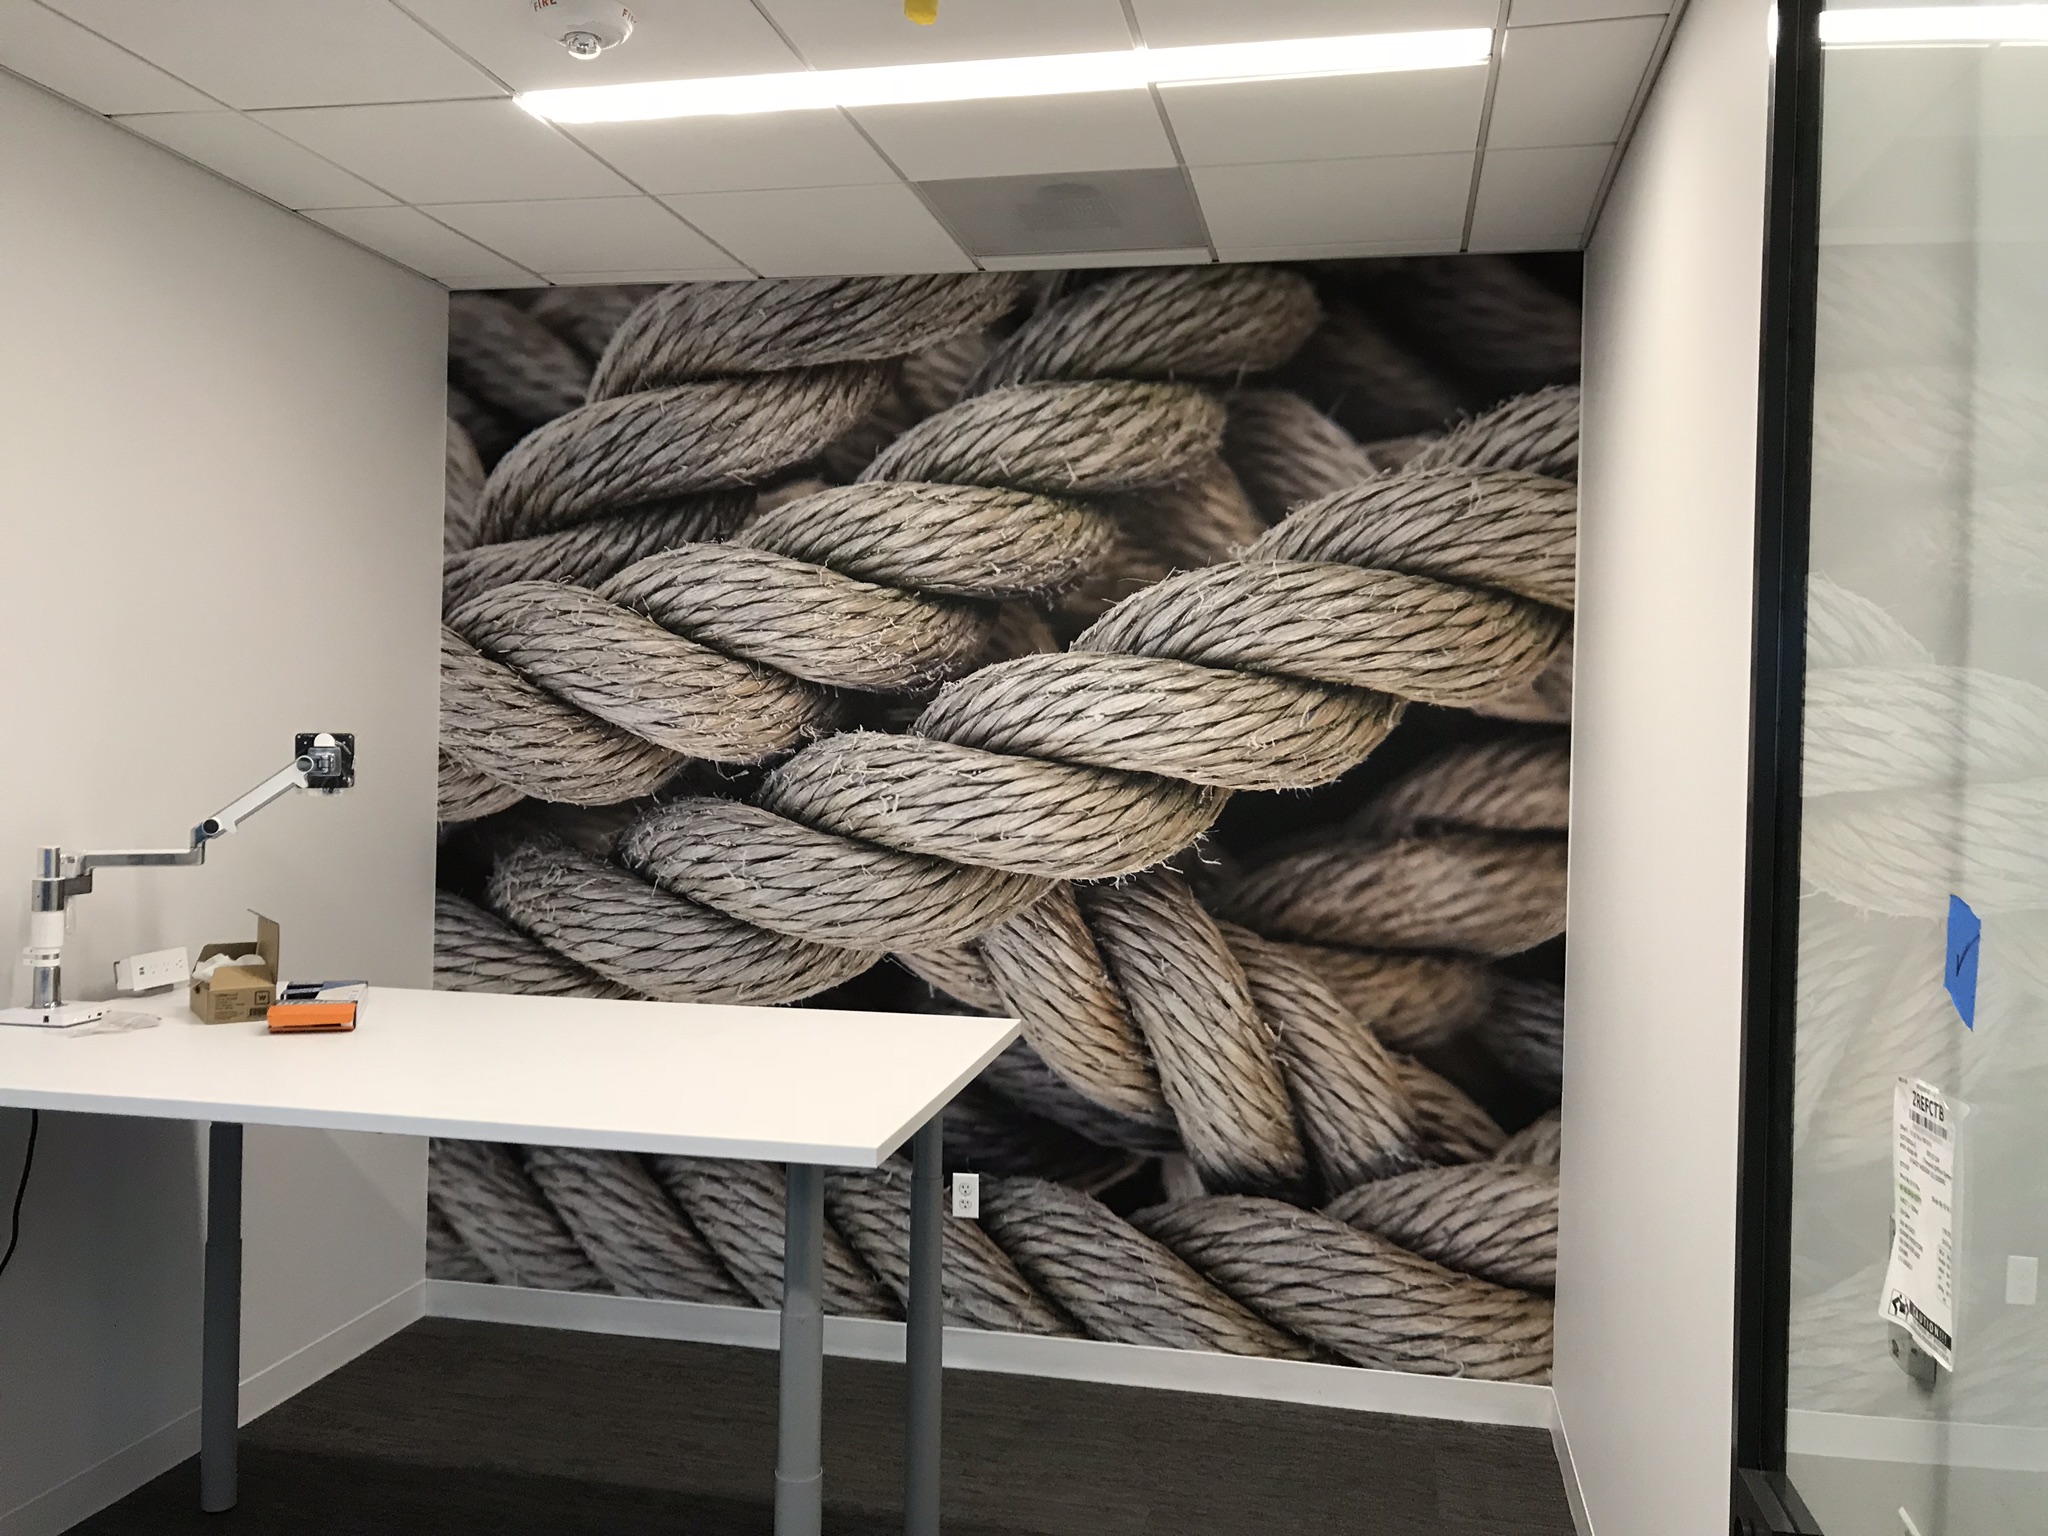 Wall mural of rope in an office space created by SpeedPro 